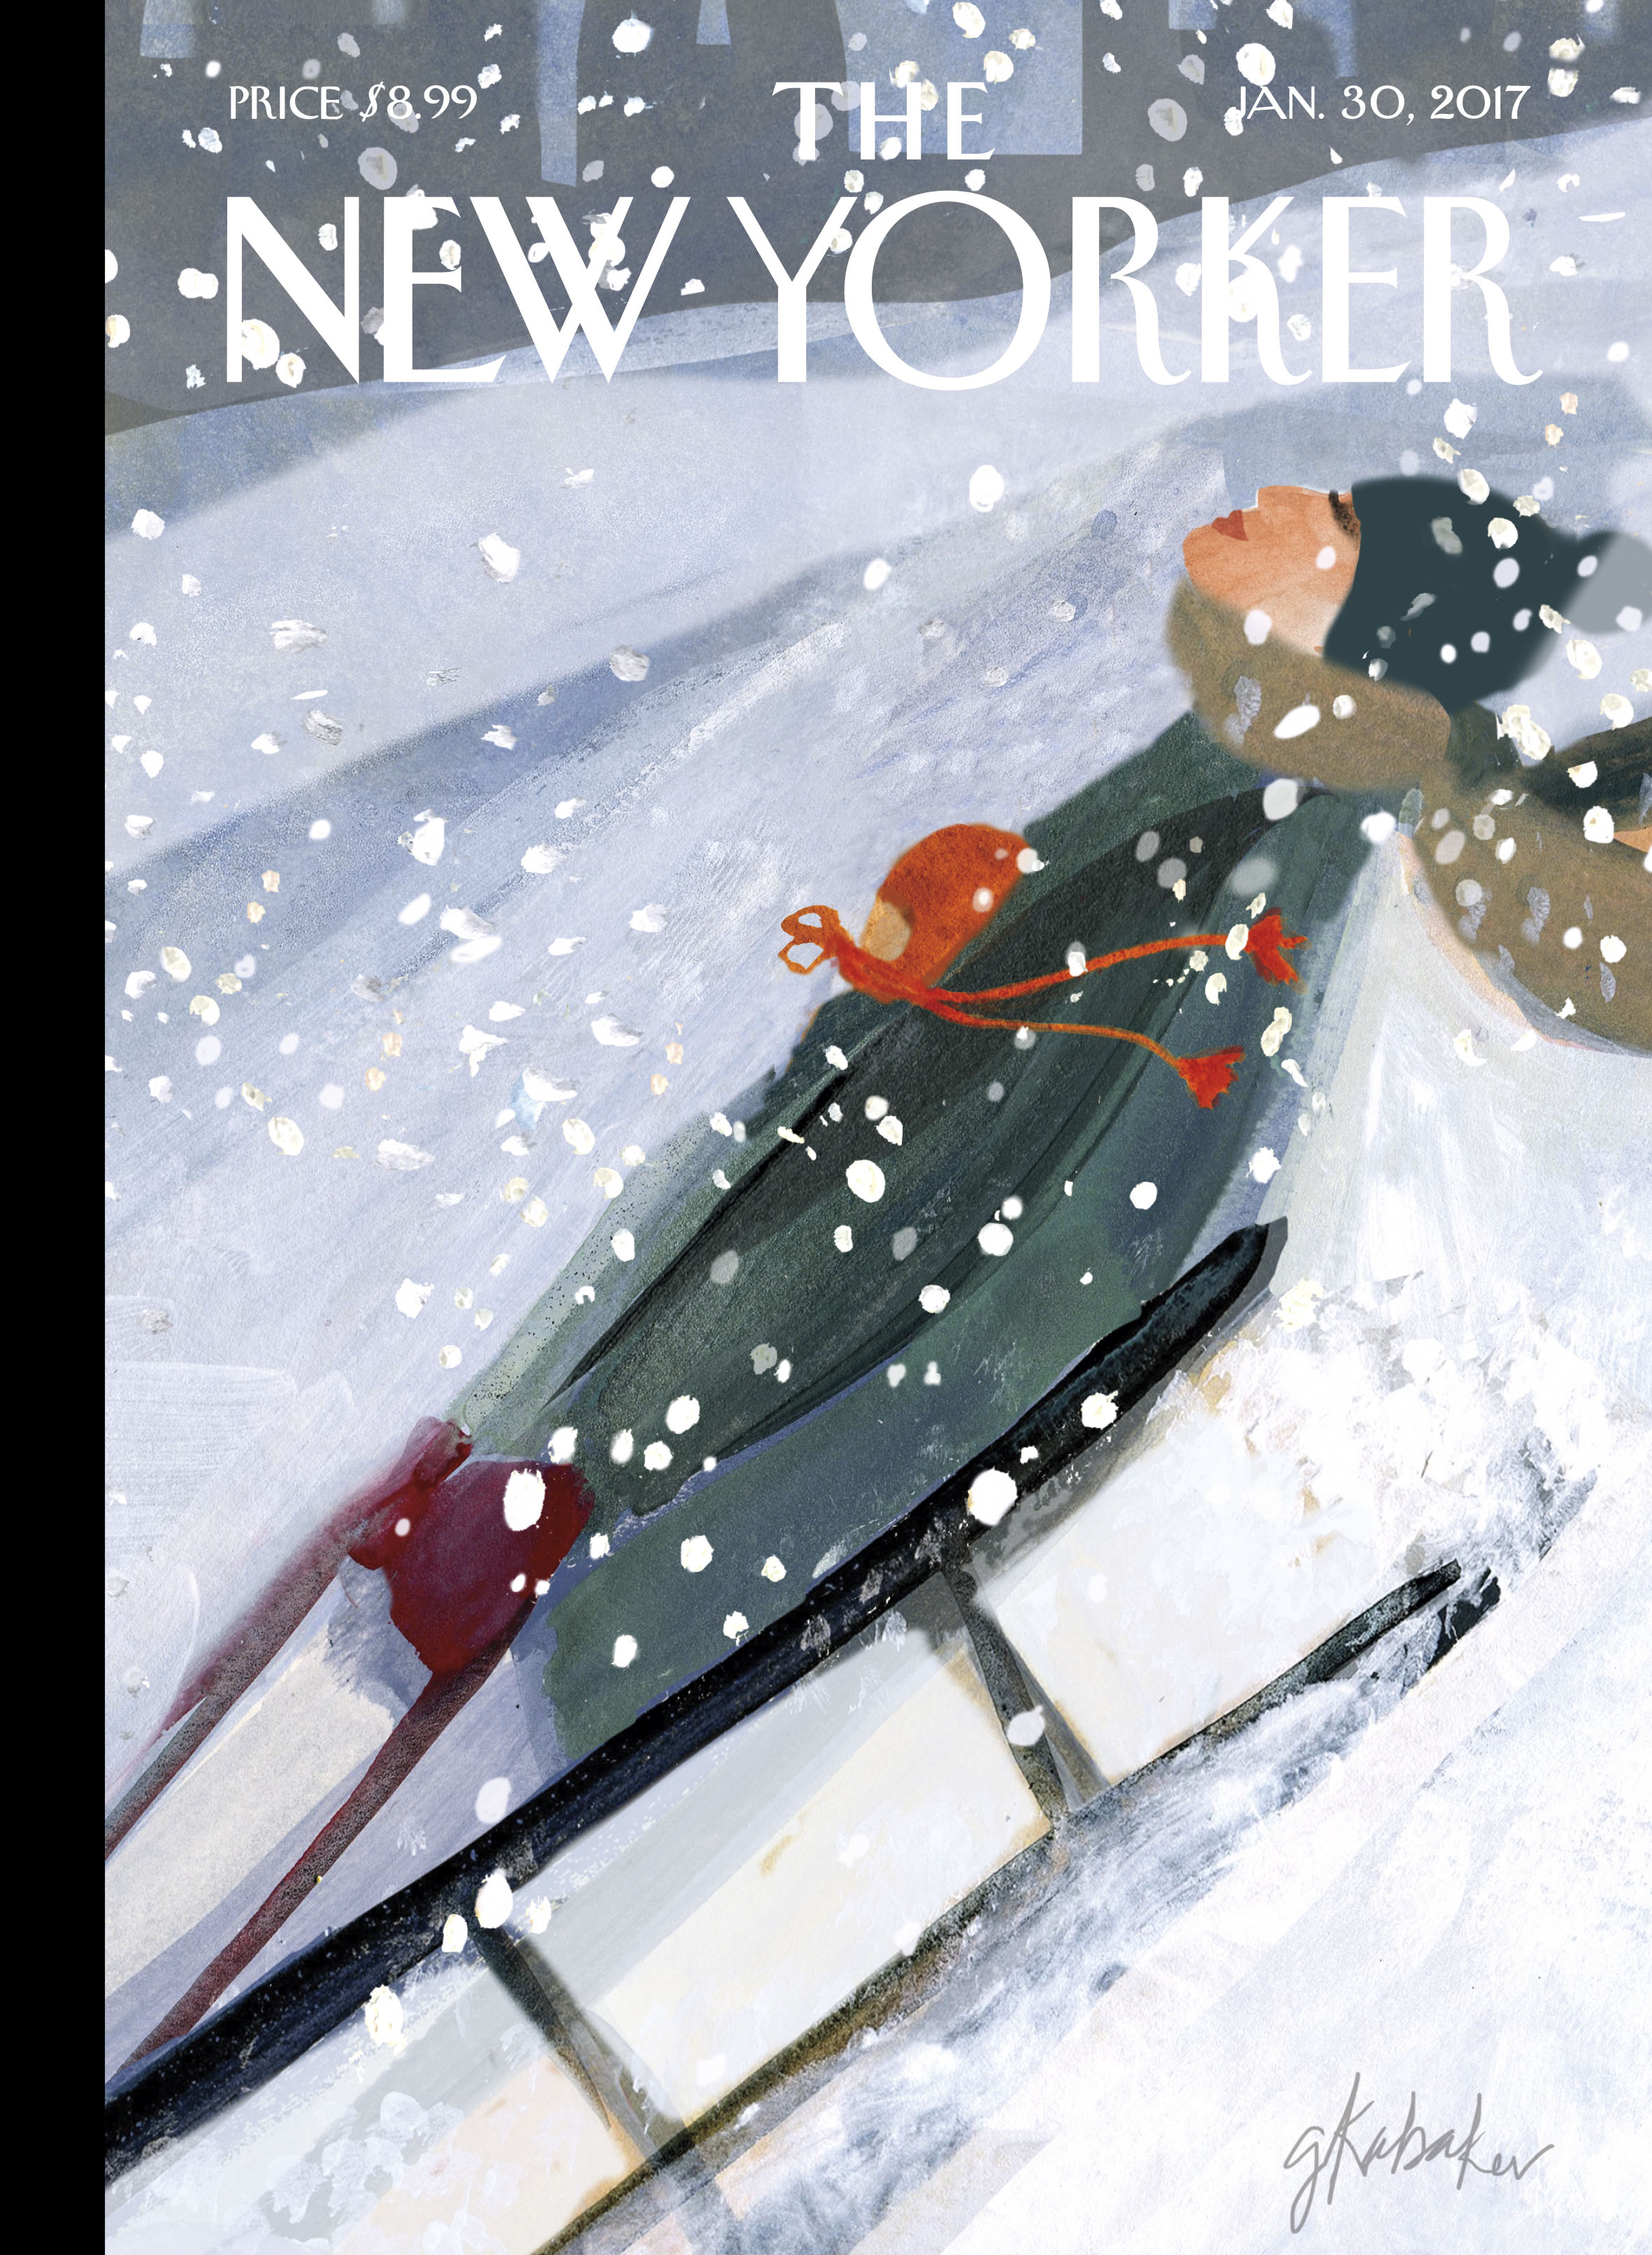 New Yorker Cover.JPEG